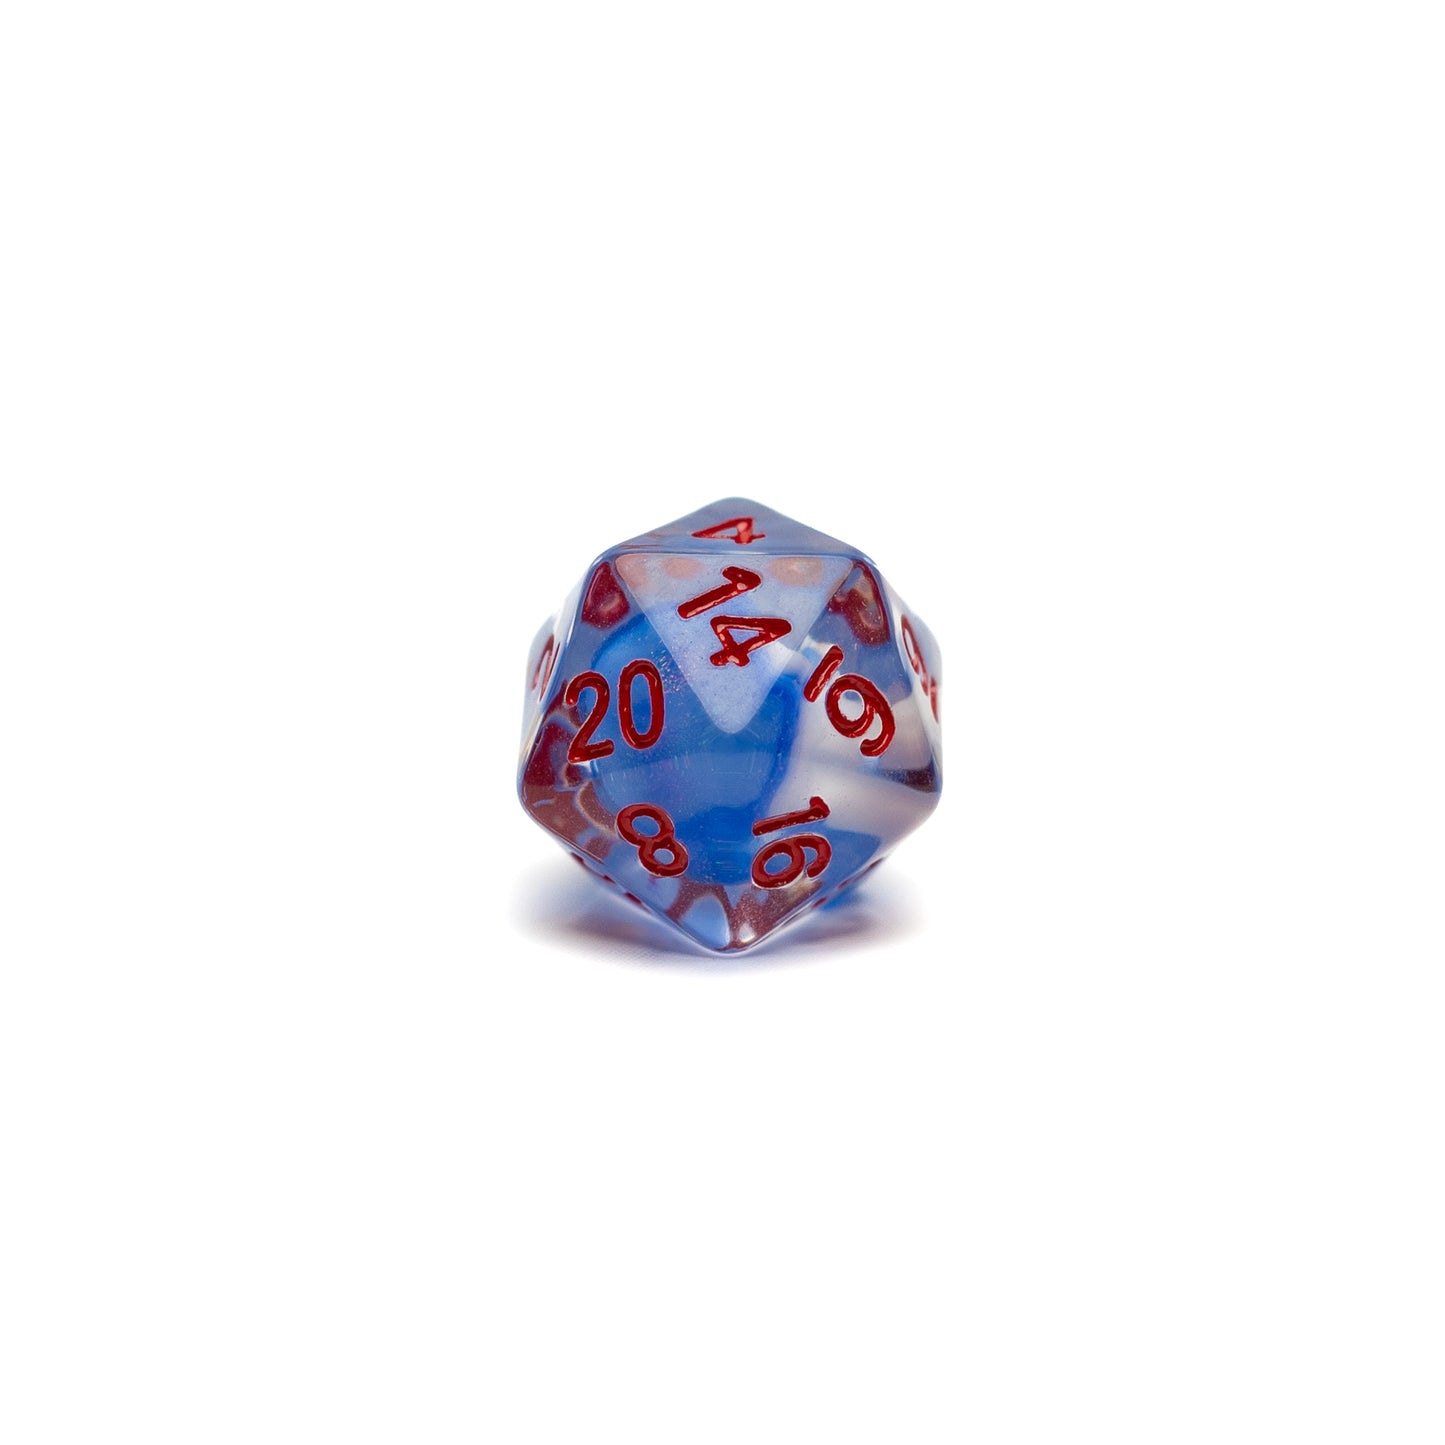 Roll Britannia Acrylic Dungeons and Dragons D20 Dice with Red and Blue Ocean Aesthetic